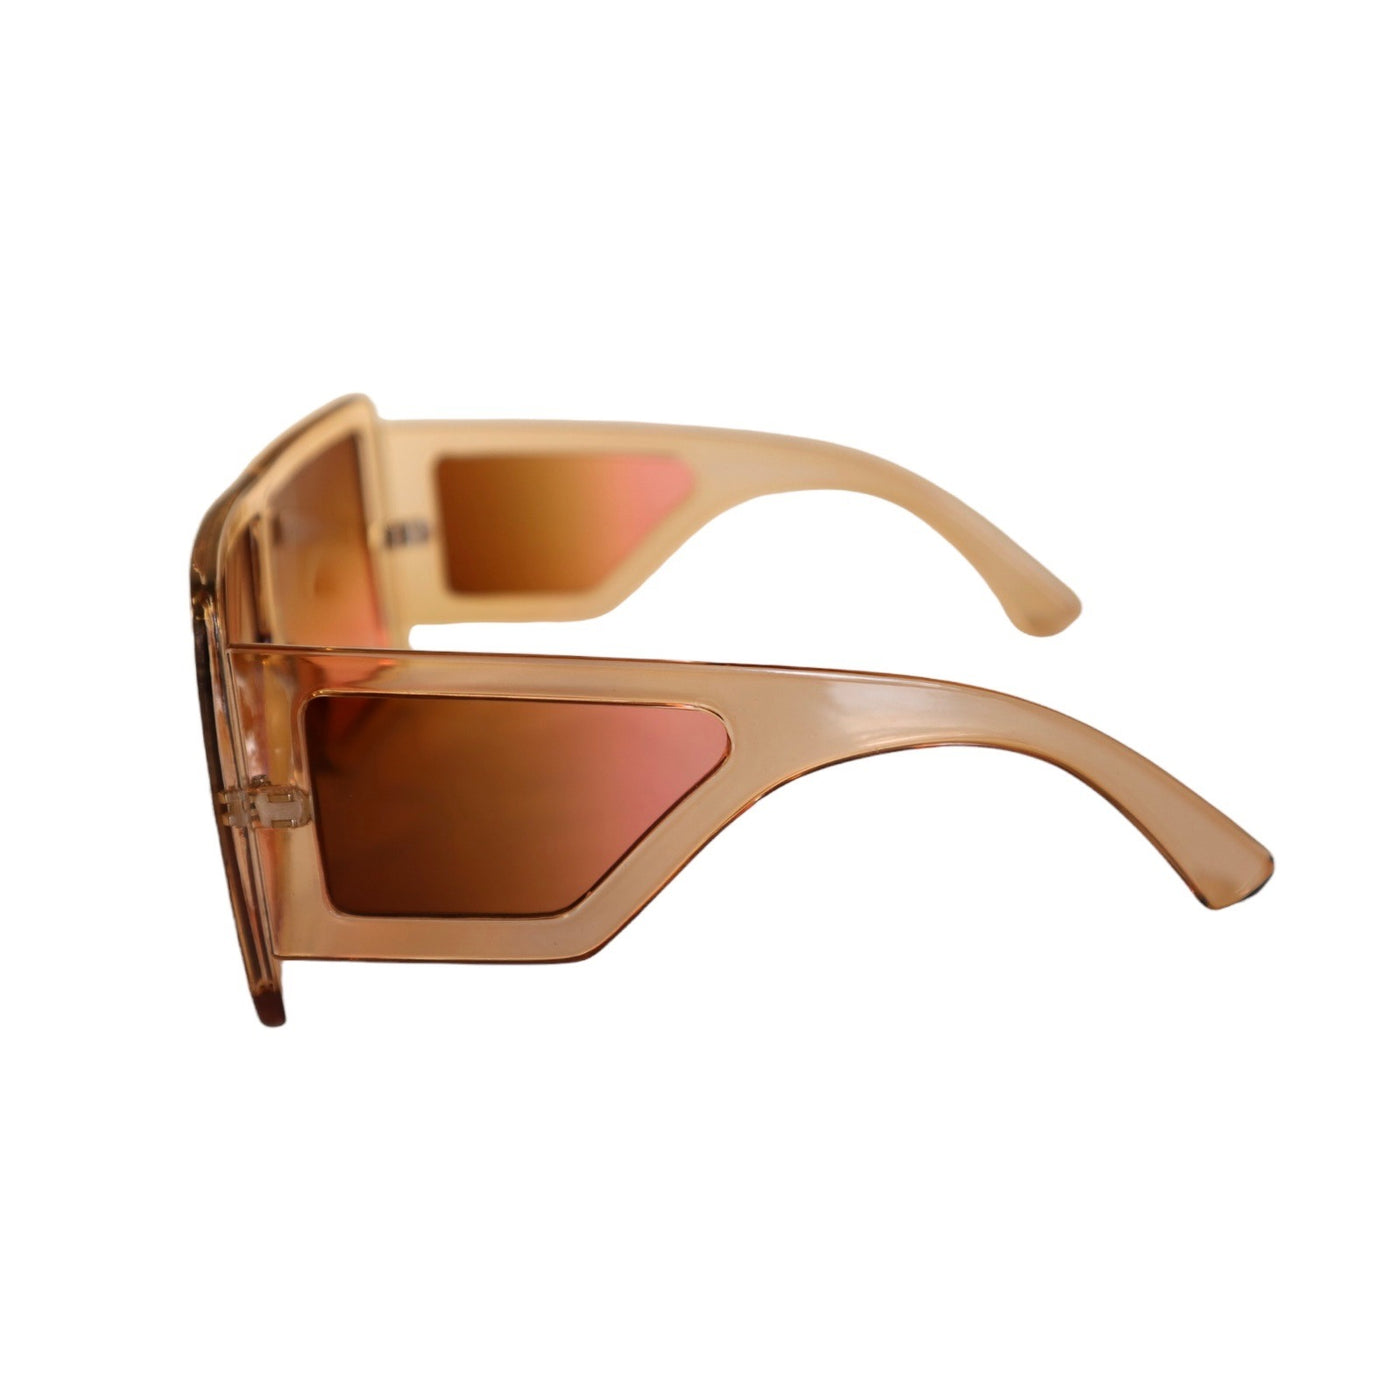 Wet But Not Wild Oversized Shield Square Sunglasses Brown Frame Brown/Pink Lens